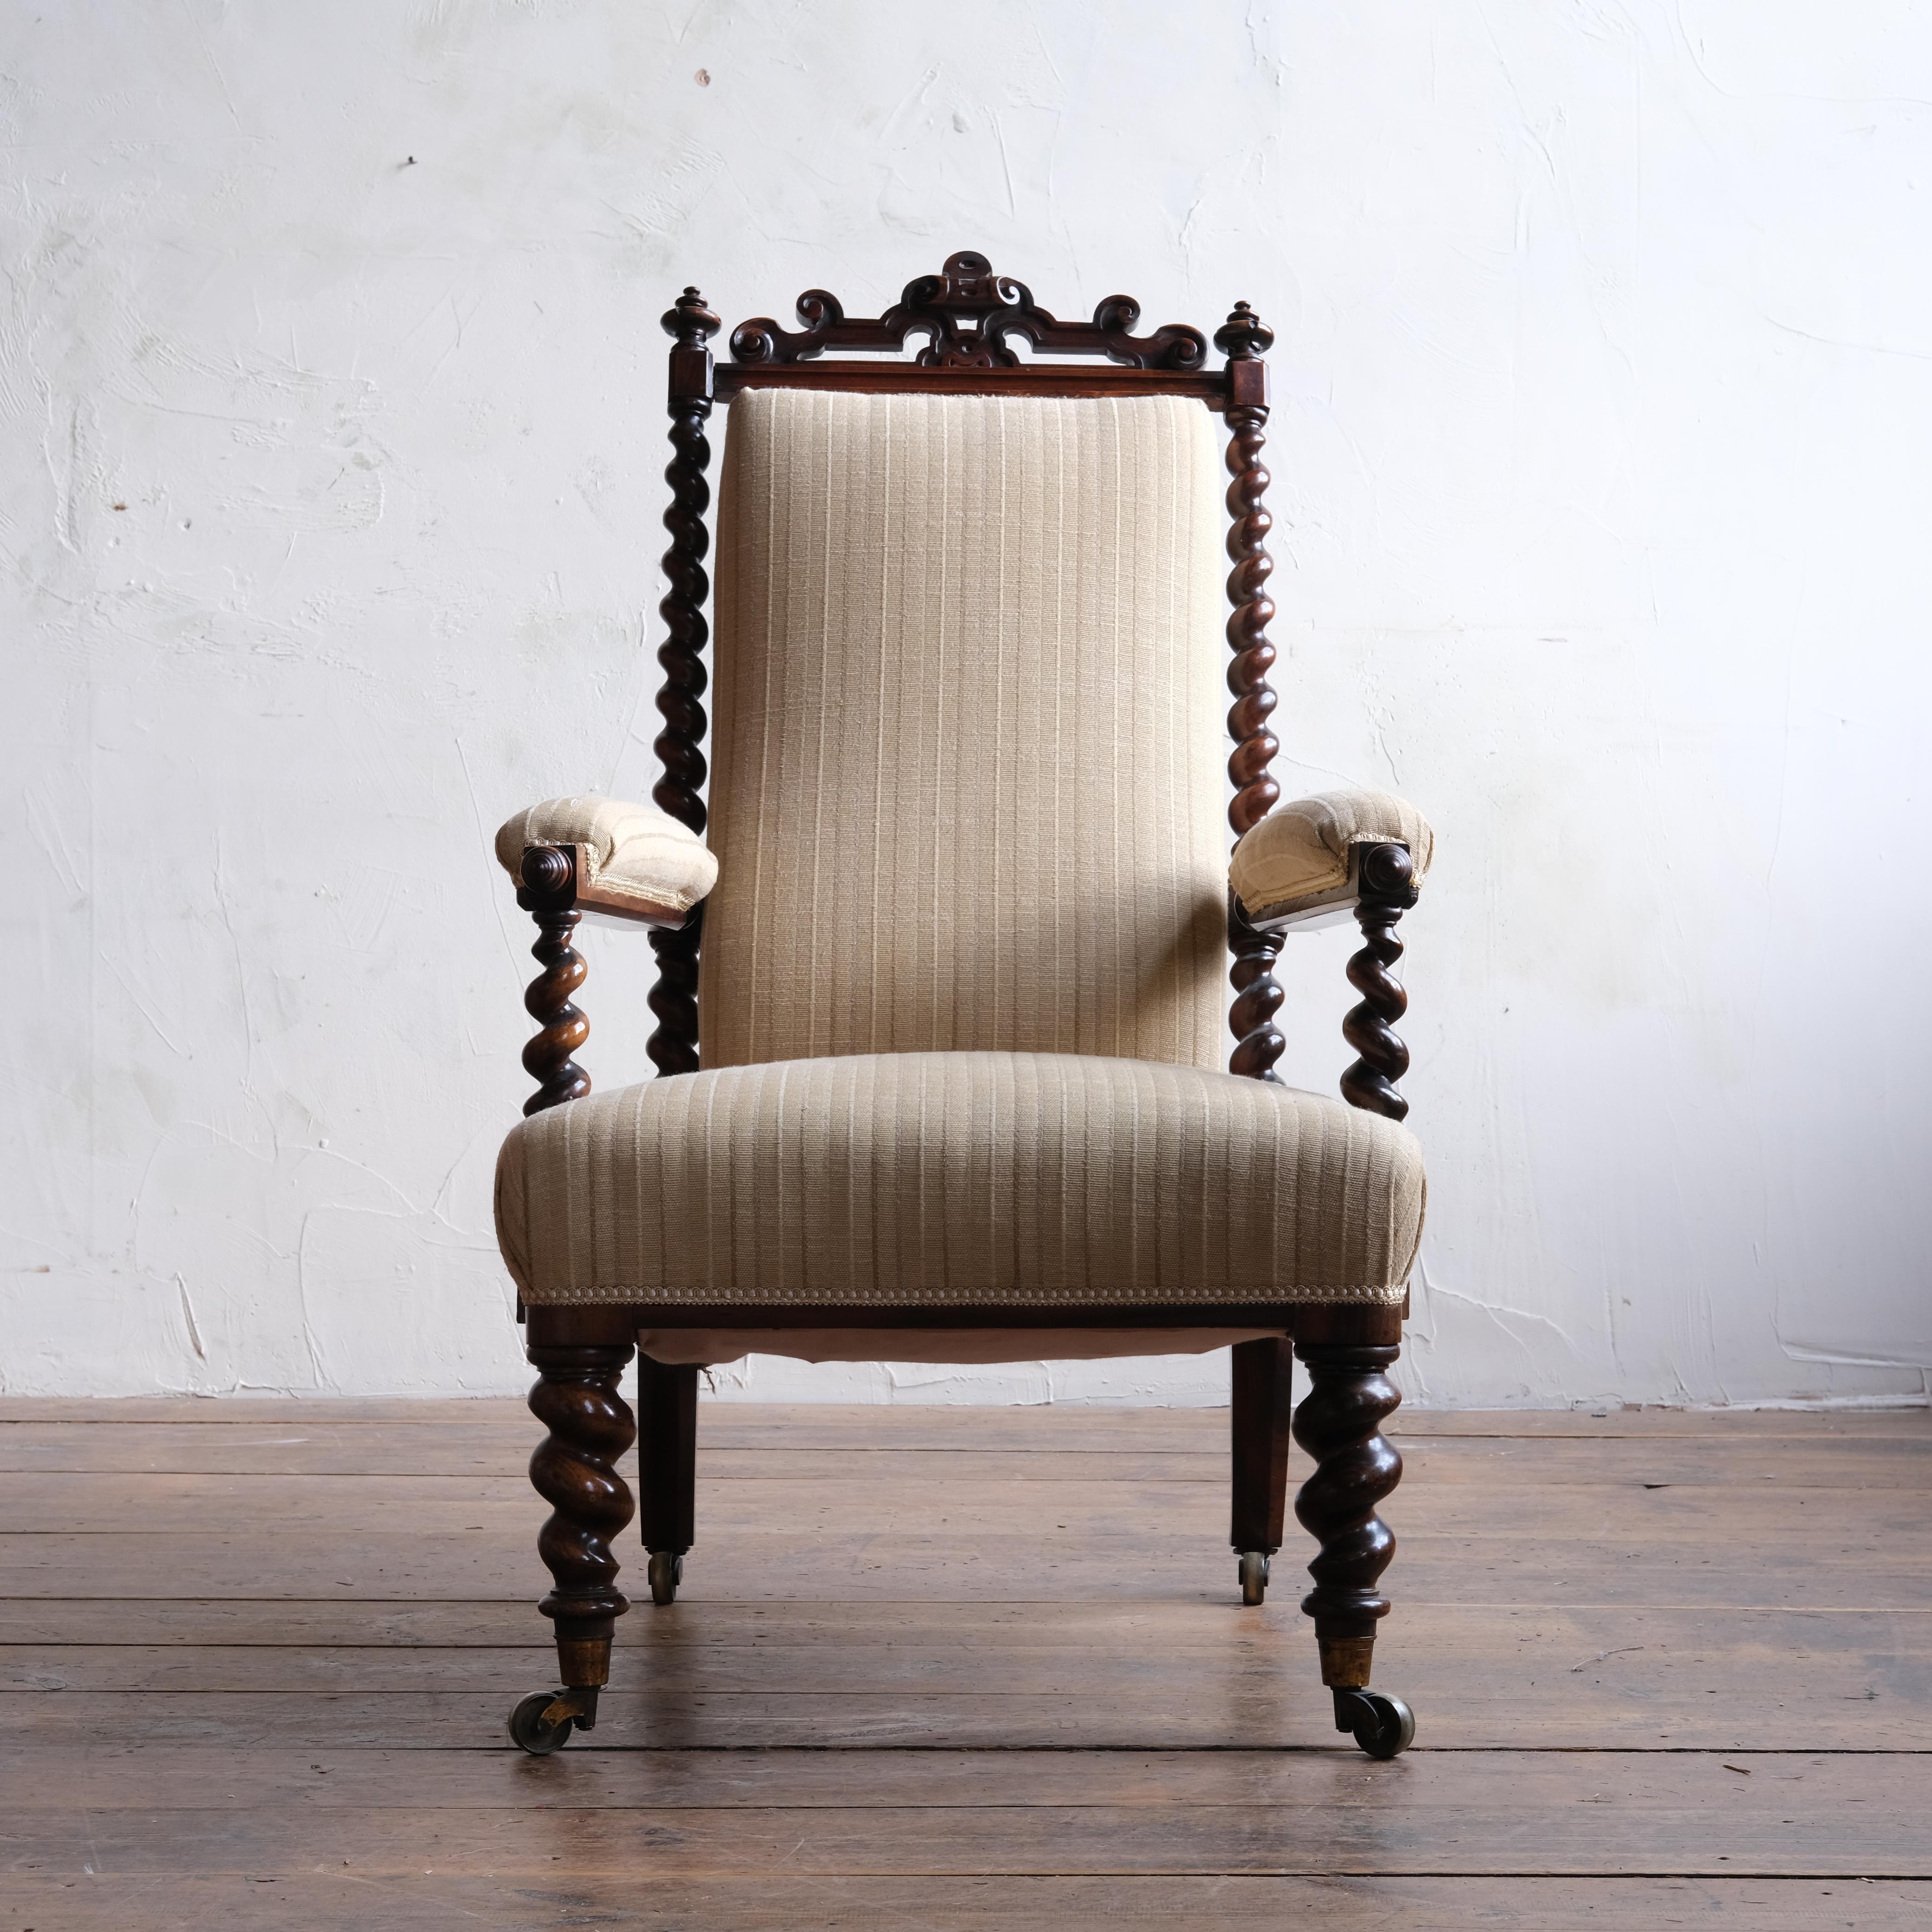 A quality 19th century open armchair by Miles & Edwards. Constructed from nicely figured solid rosewood and raise on barley twist legs and show frame with the original brass casters. Structurally in solid order with the beige striped linen type